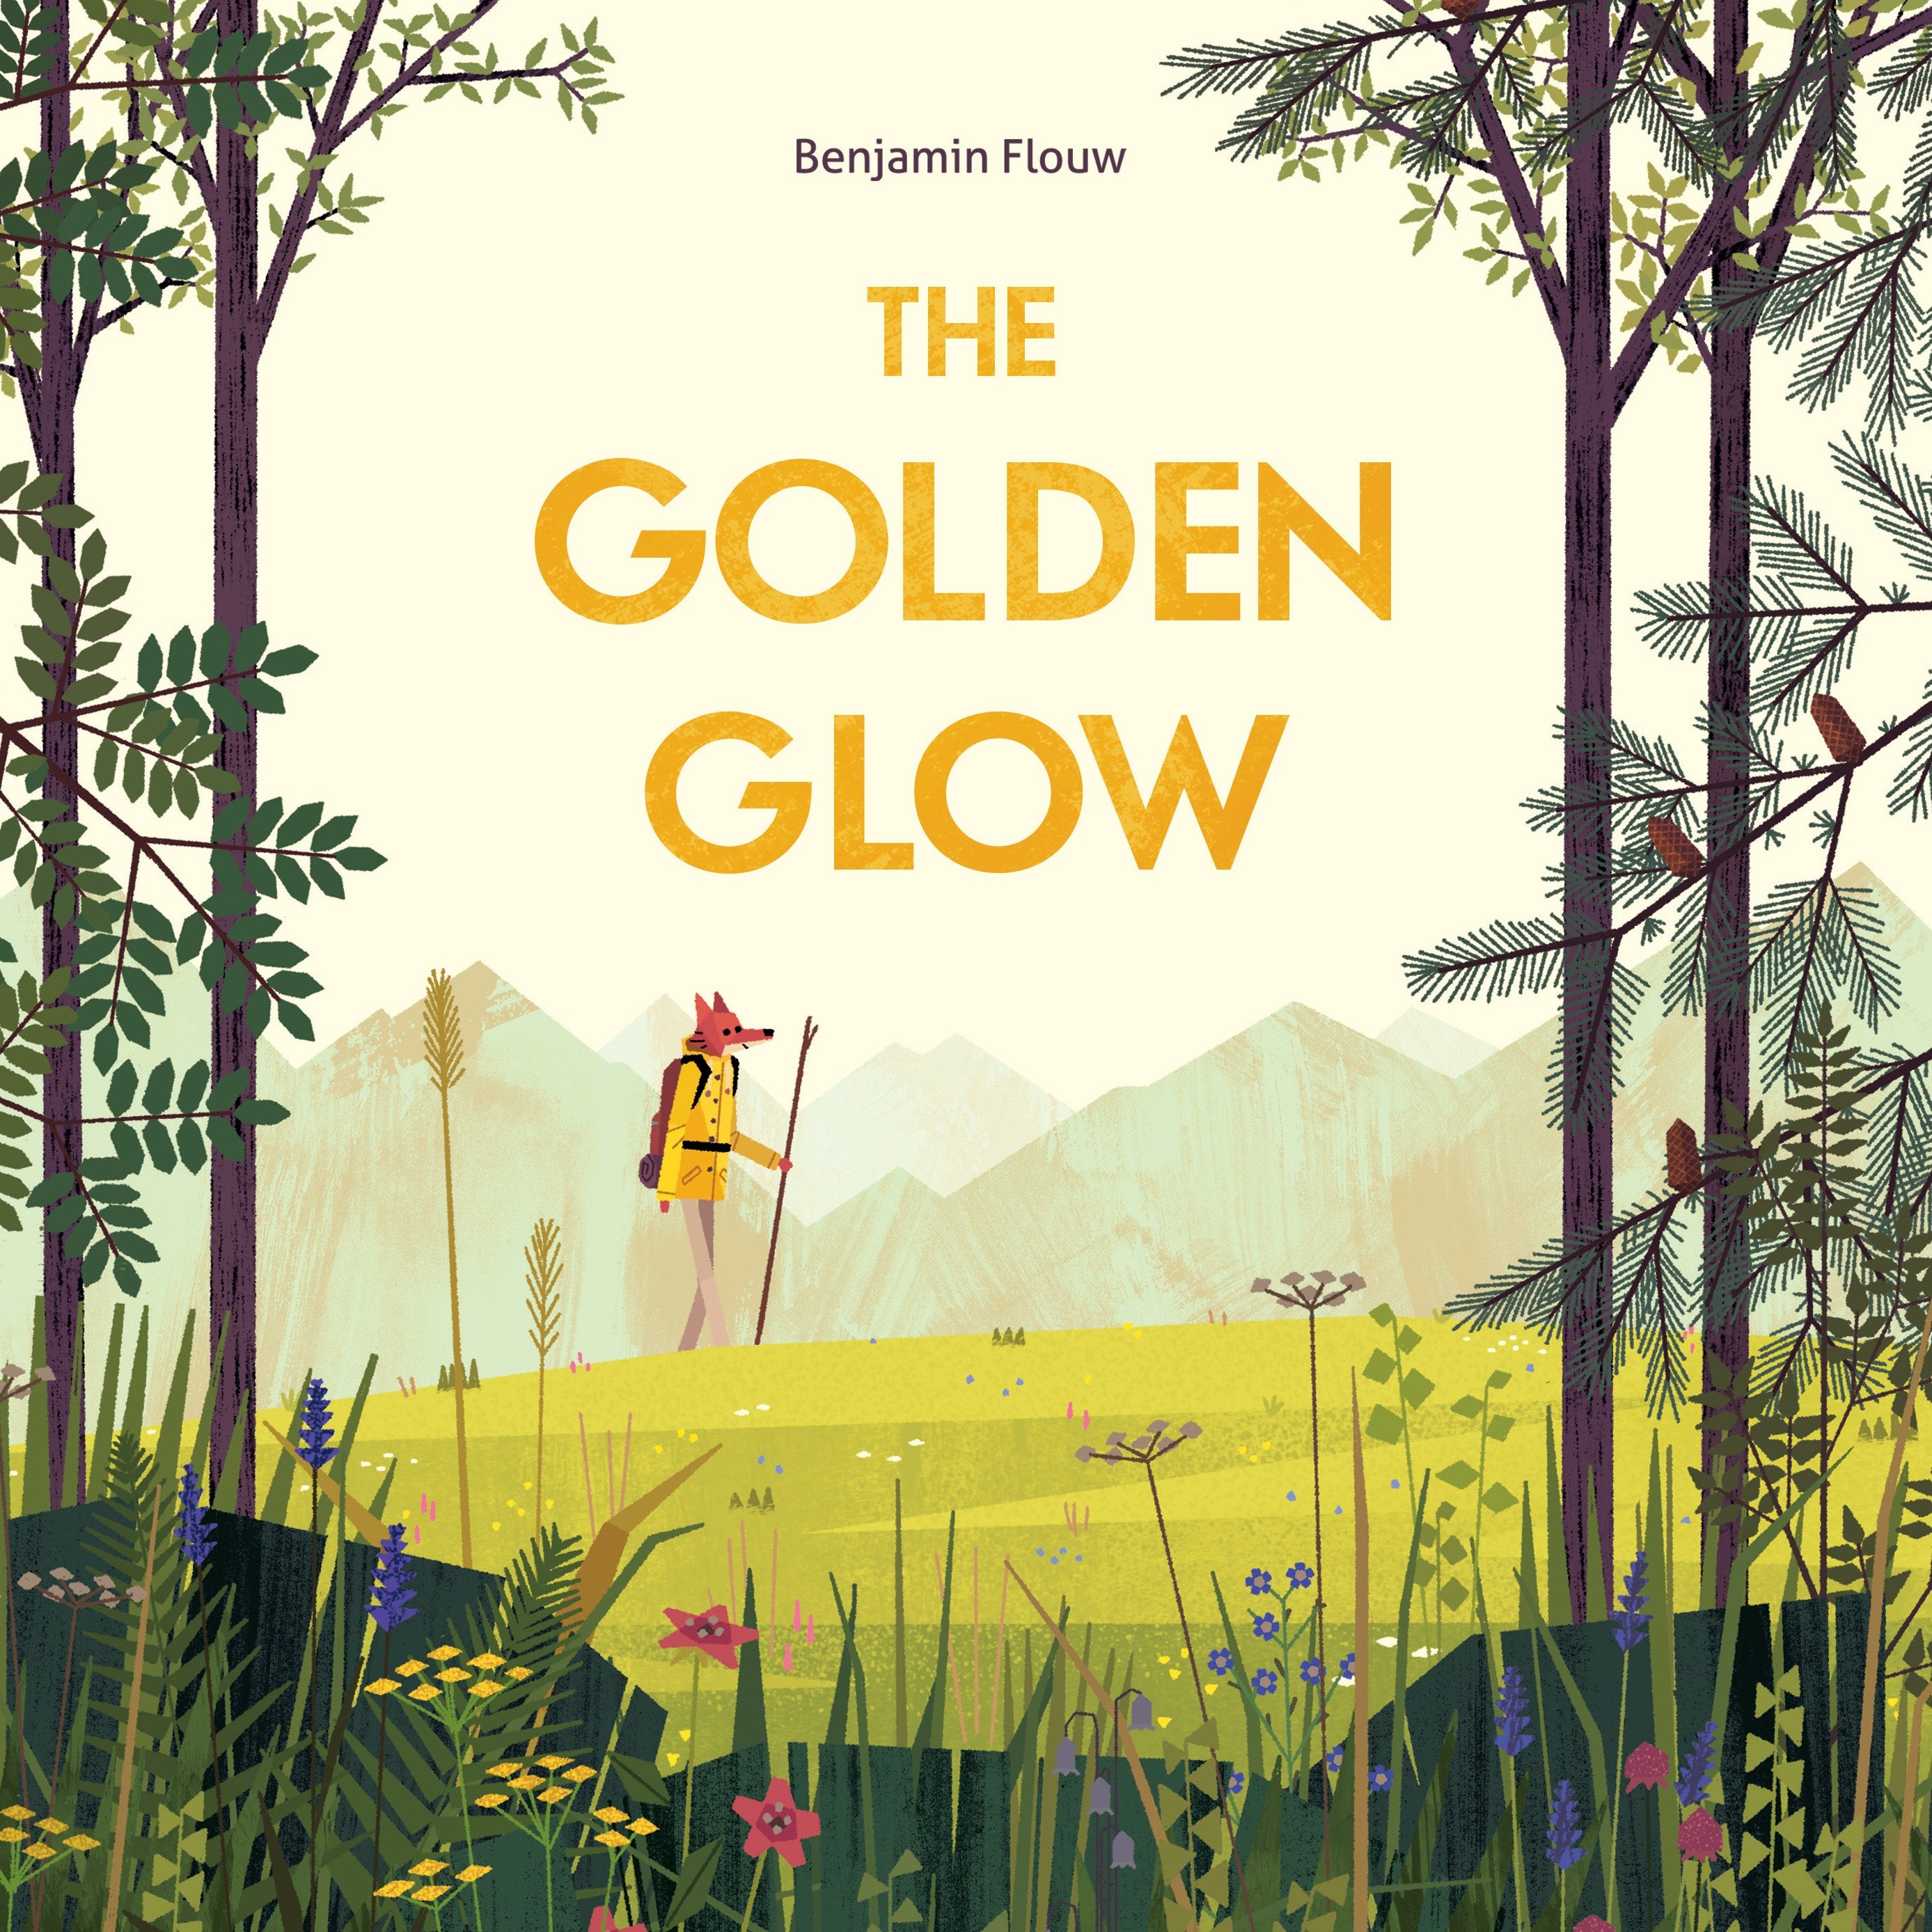 The Golden Glow (Hardcover Book)